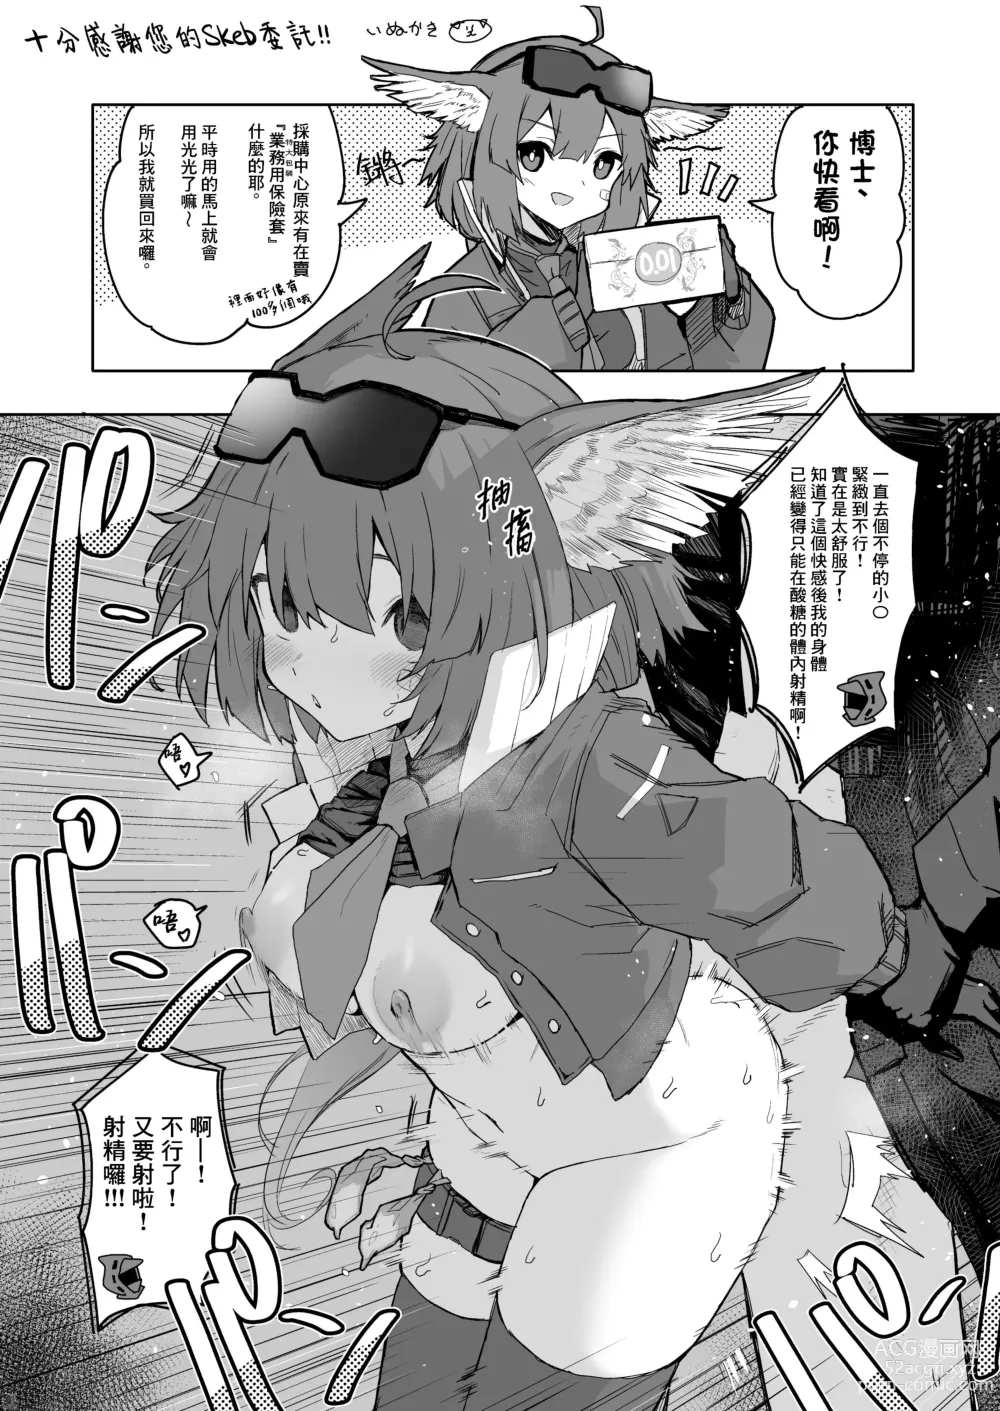 Page 37 of doujinshi Twitter collection